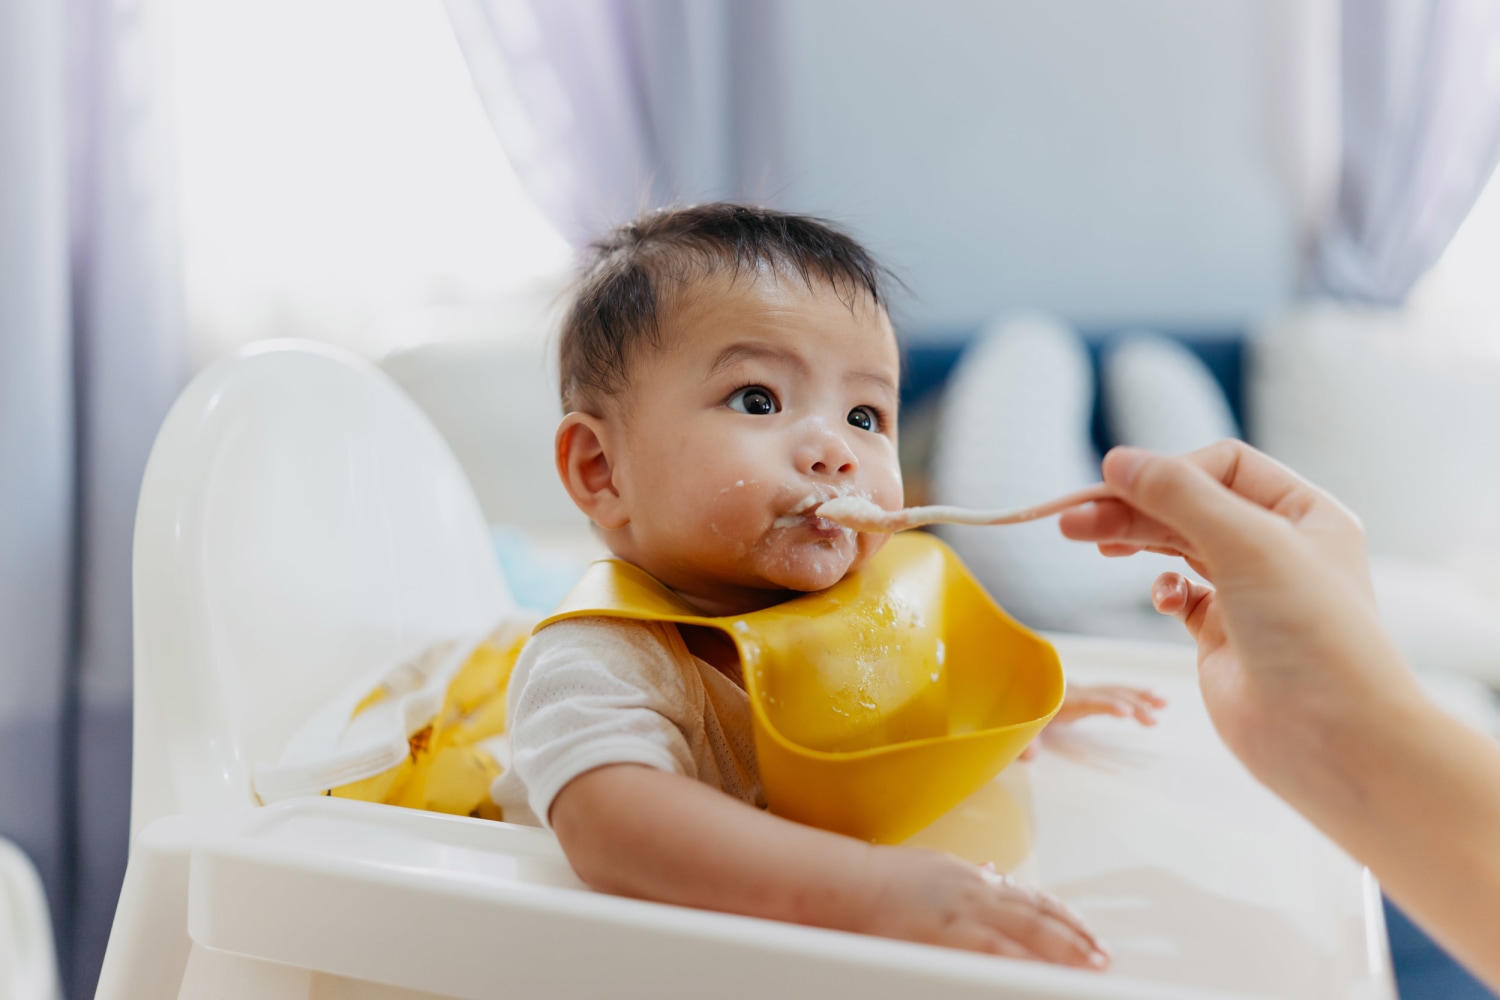 Why there still aren't limits on lead in baby food